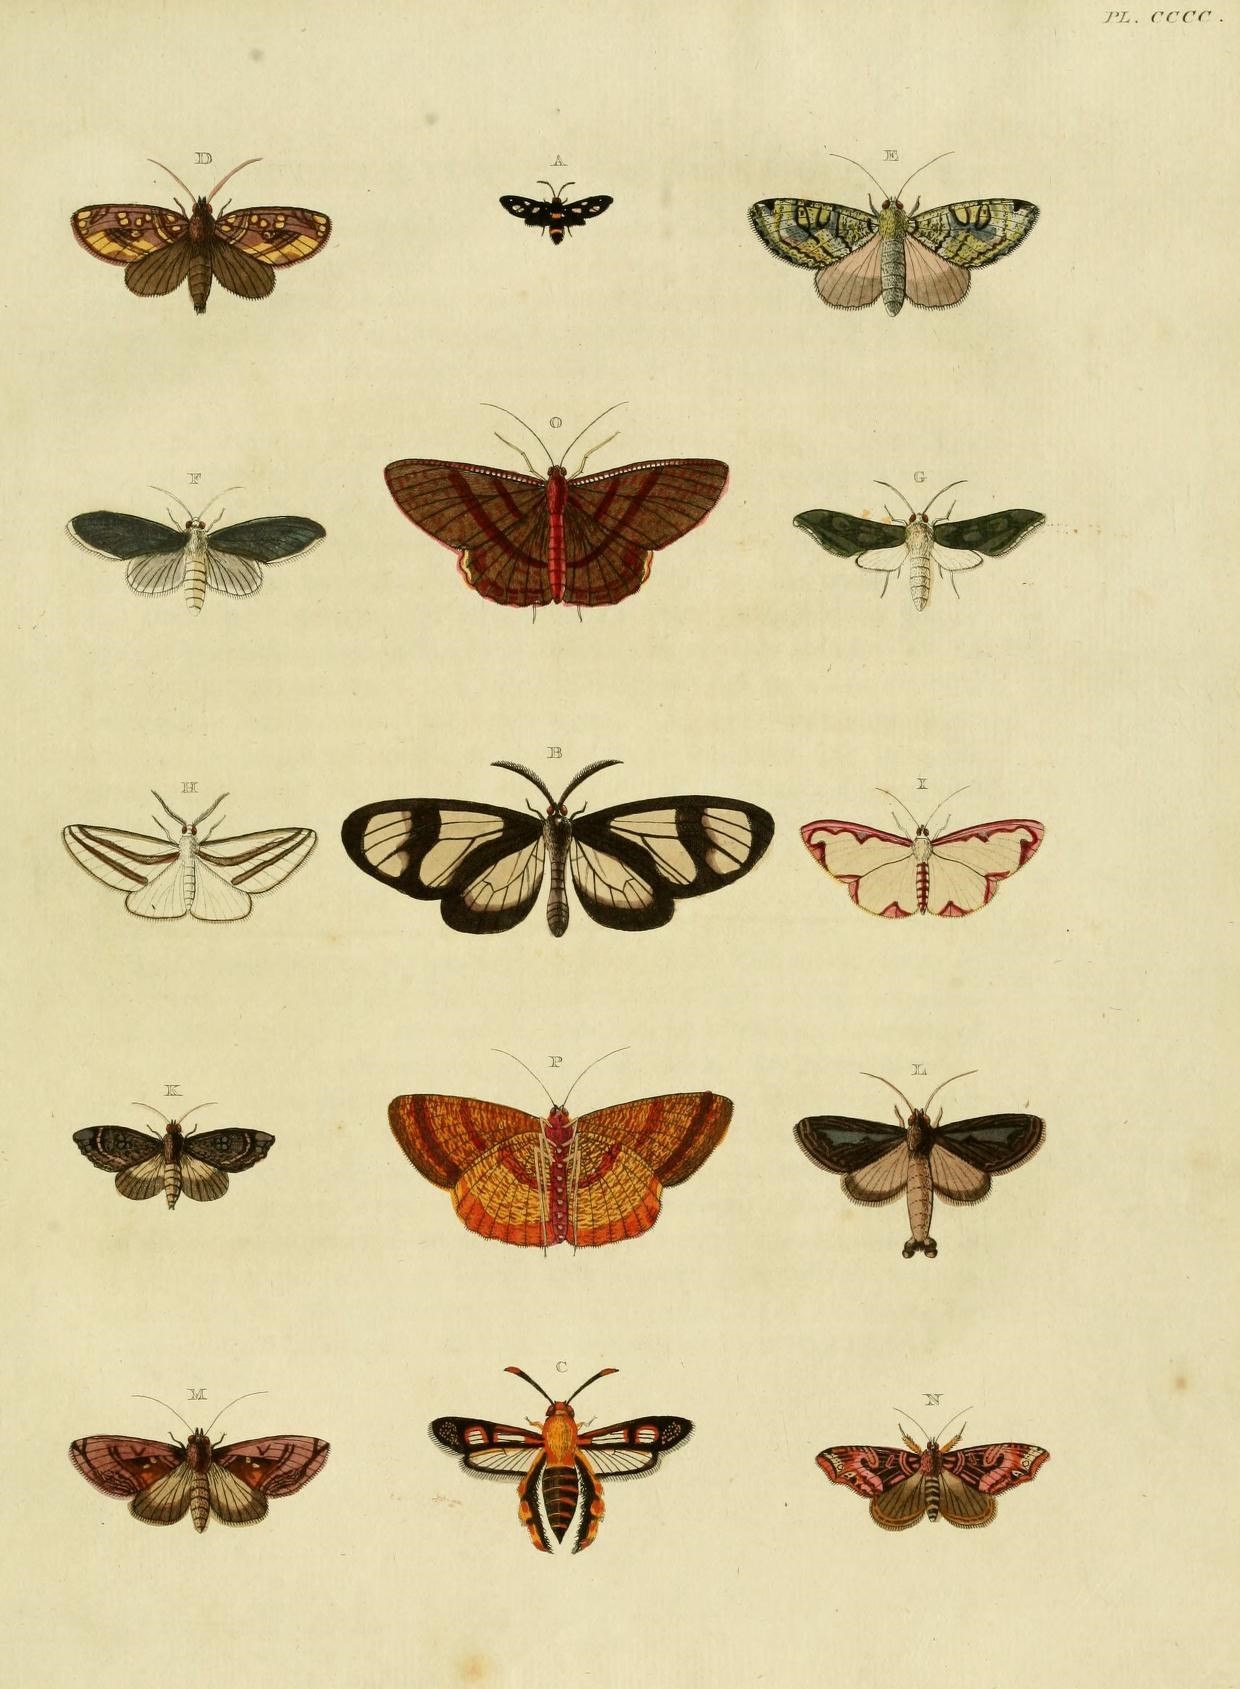 a collection of insects is shown in this illustration